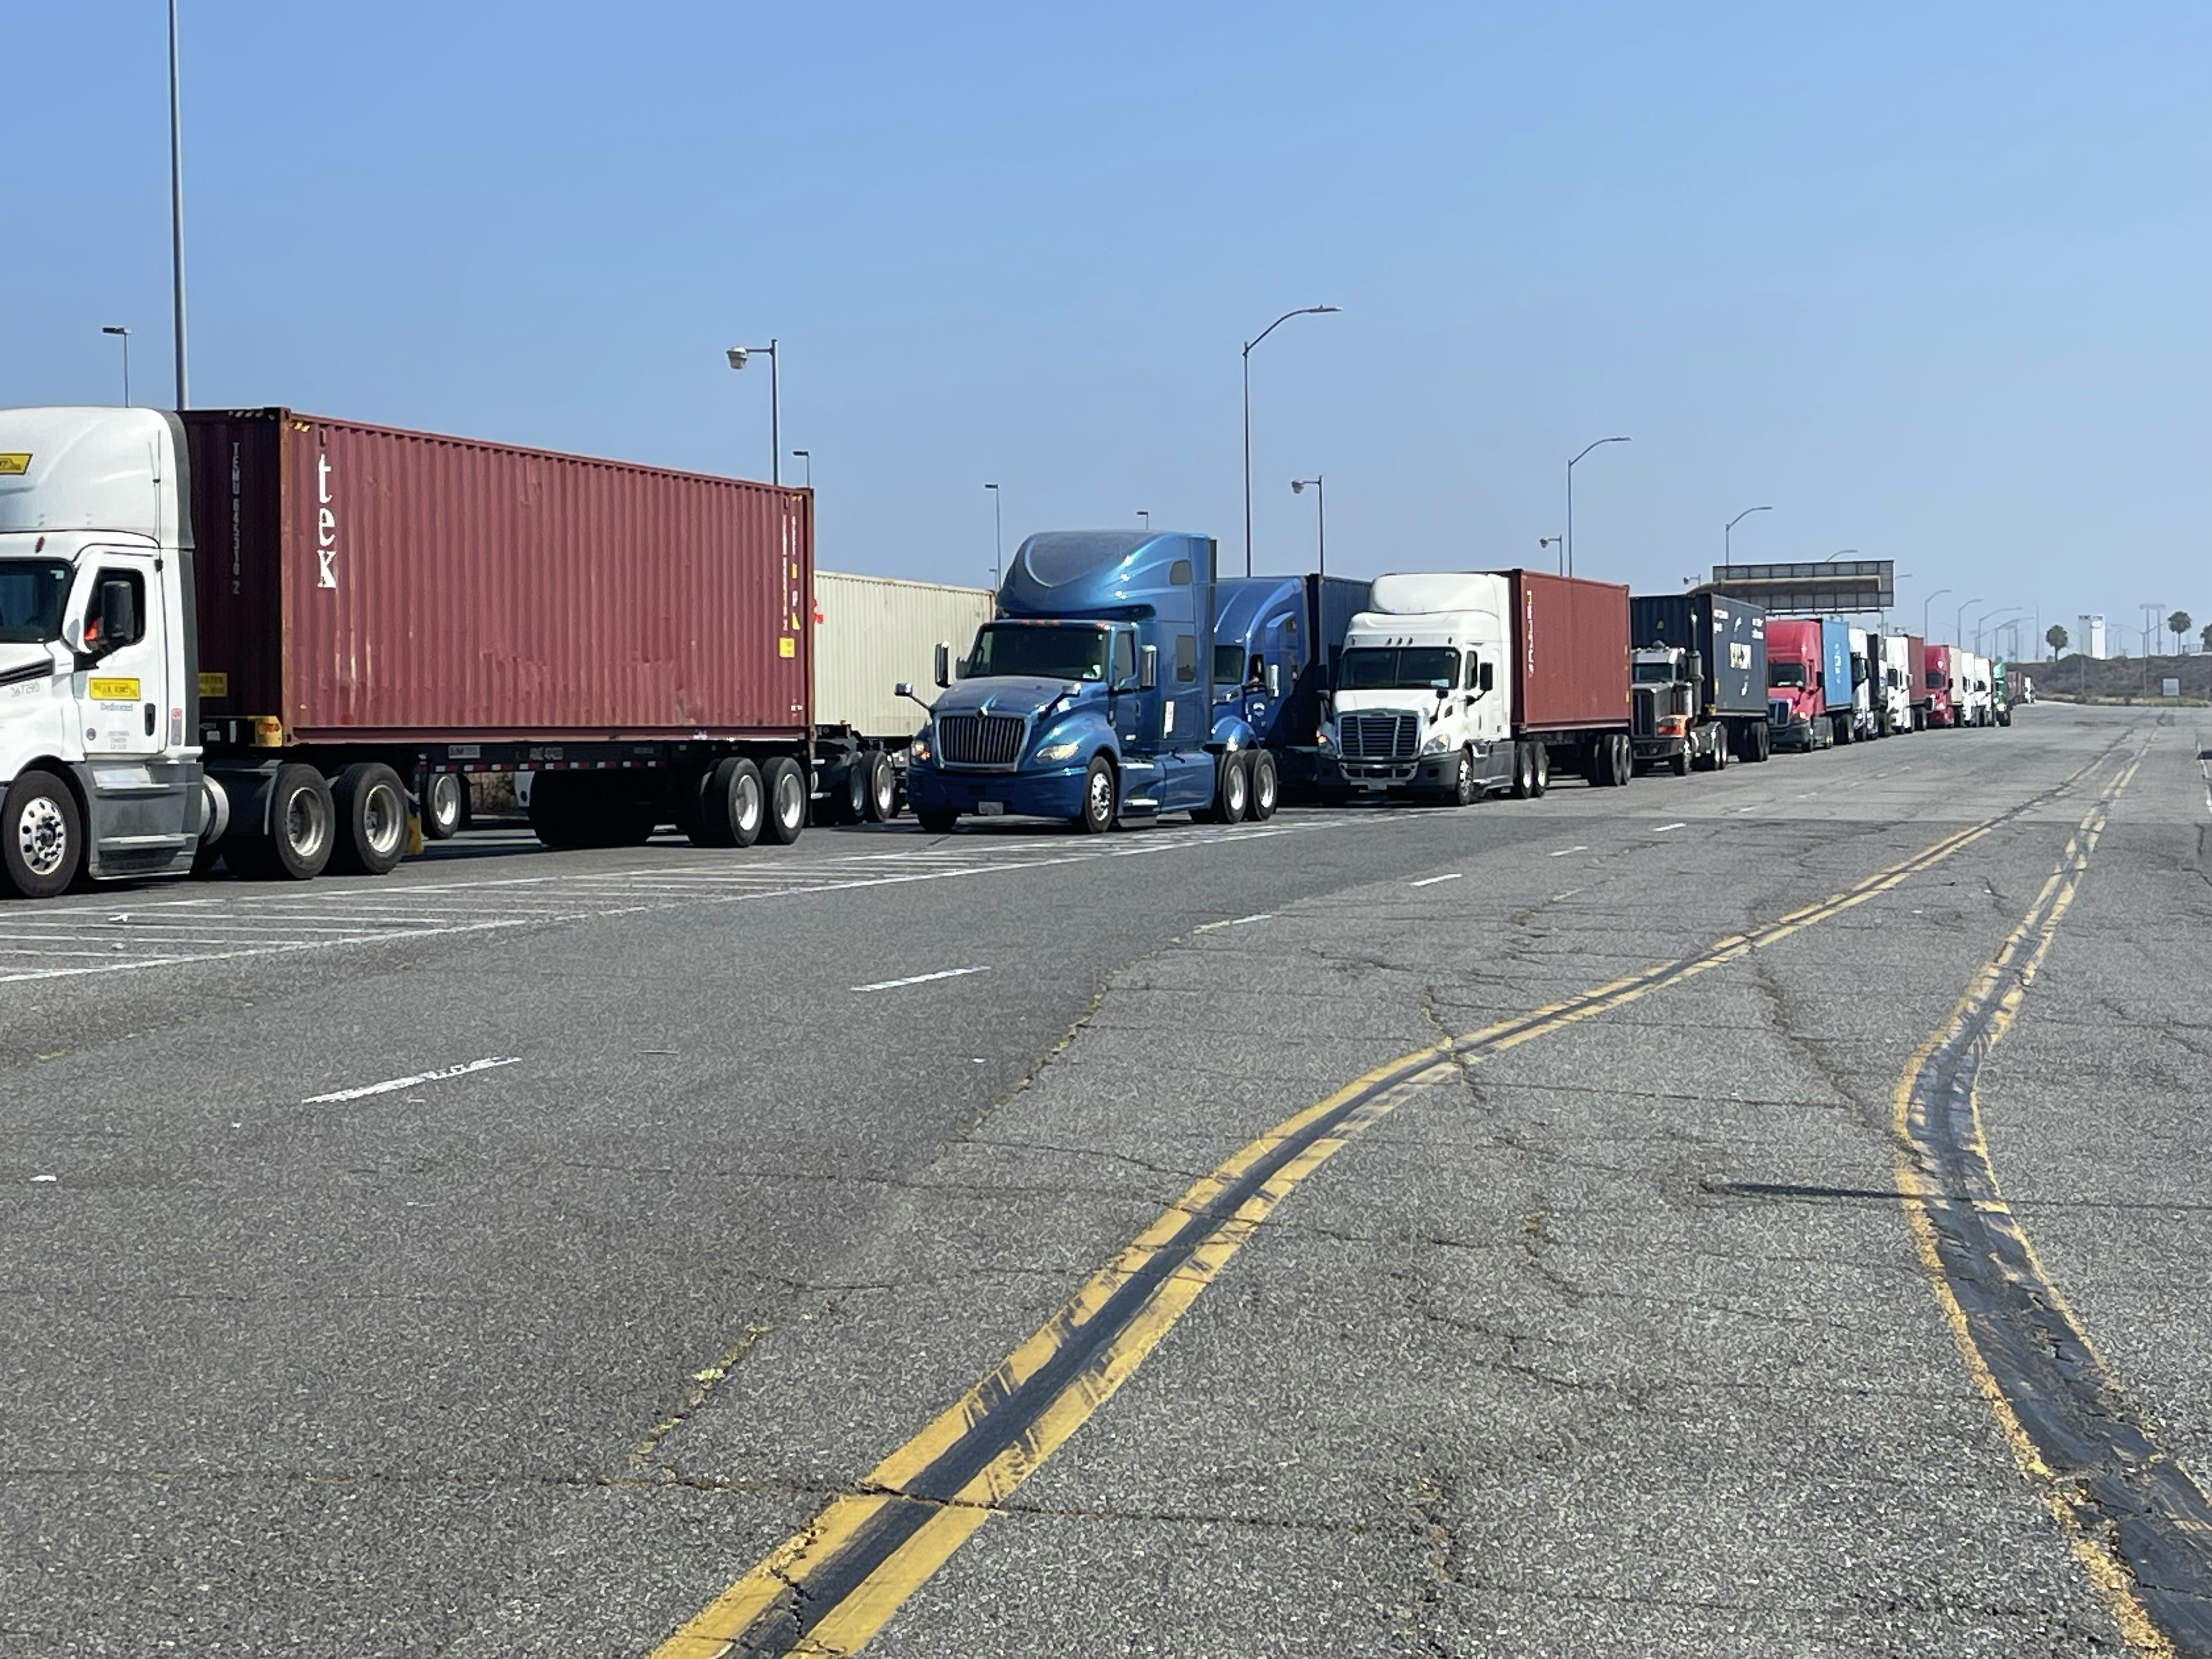 Port of L.A. working on ‘catching up’ after operations disrupted by CrowdStrike outage